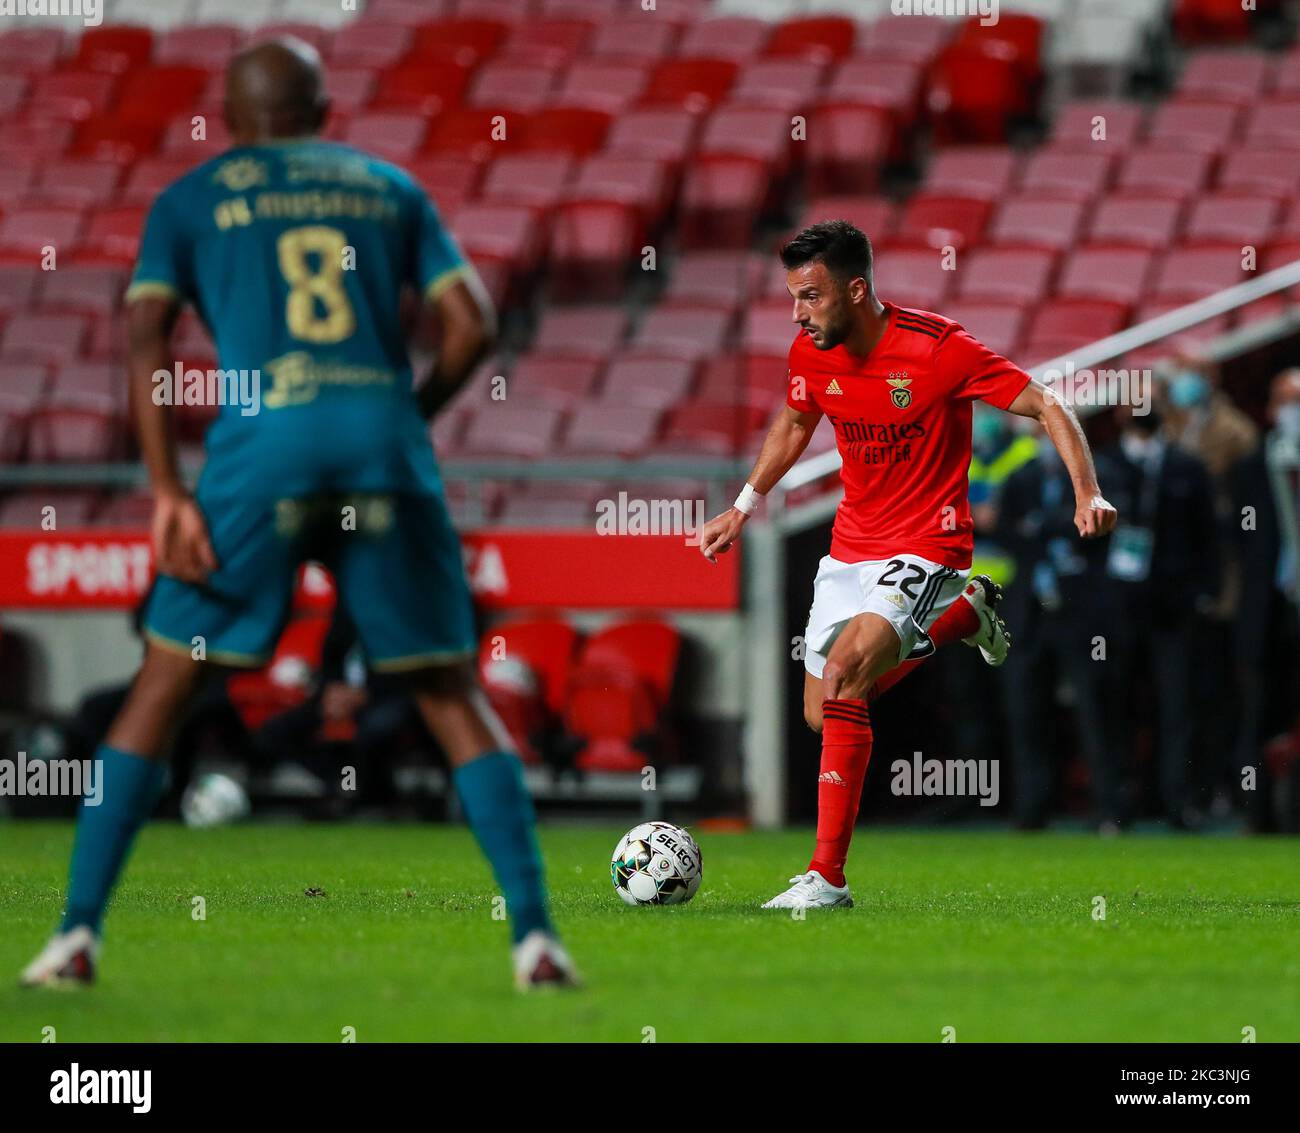 Andreas Samaris of SL Benfica in action during the Portuguese League 2020/21 match between SL Benfica and SC Braga, at Luz Stadium in Lisbon on November 8, 2020. (Photo by Paulo Nascimento/NurPhoto) Stock Photo